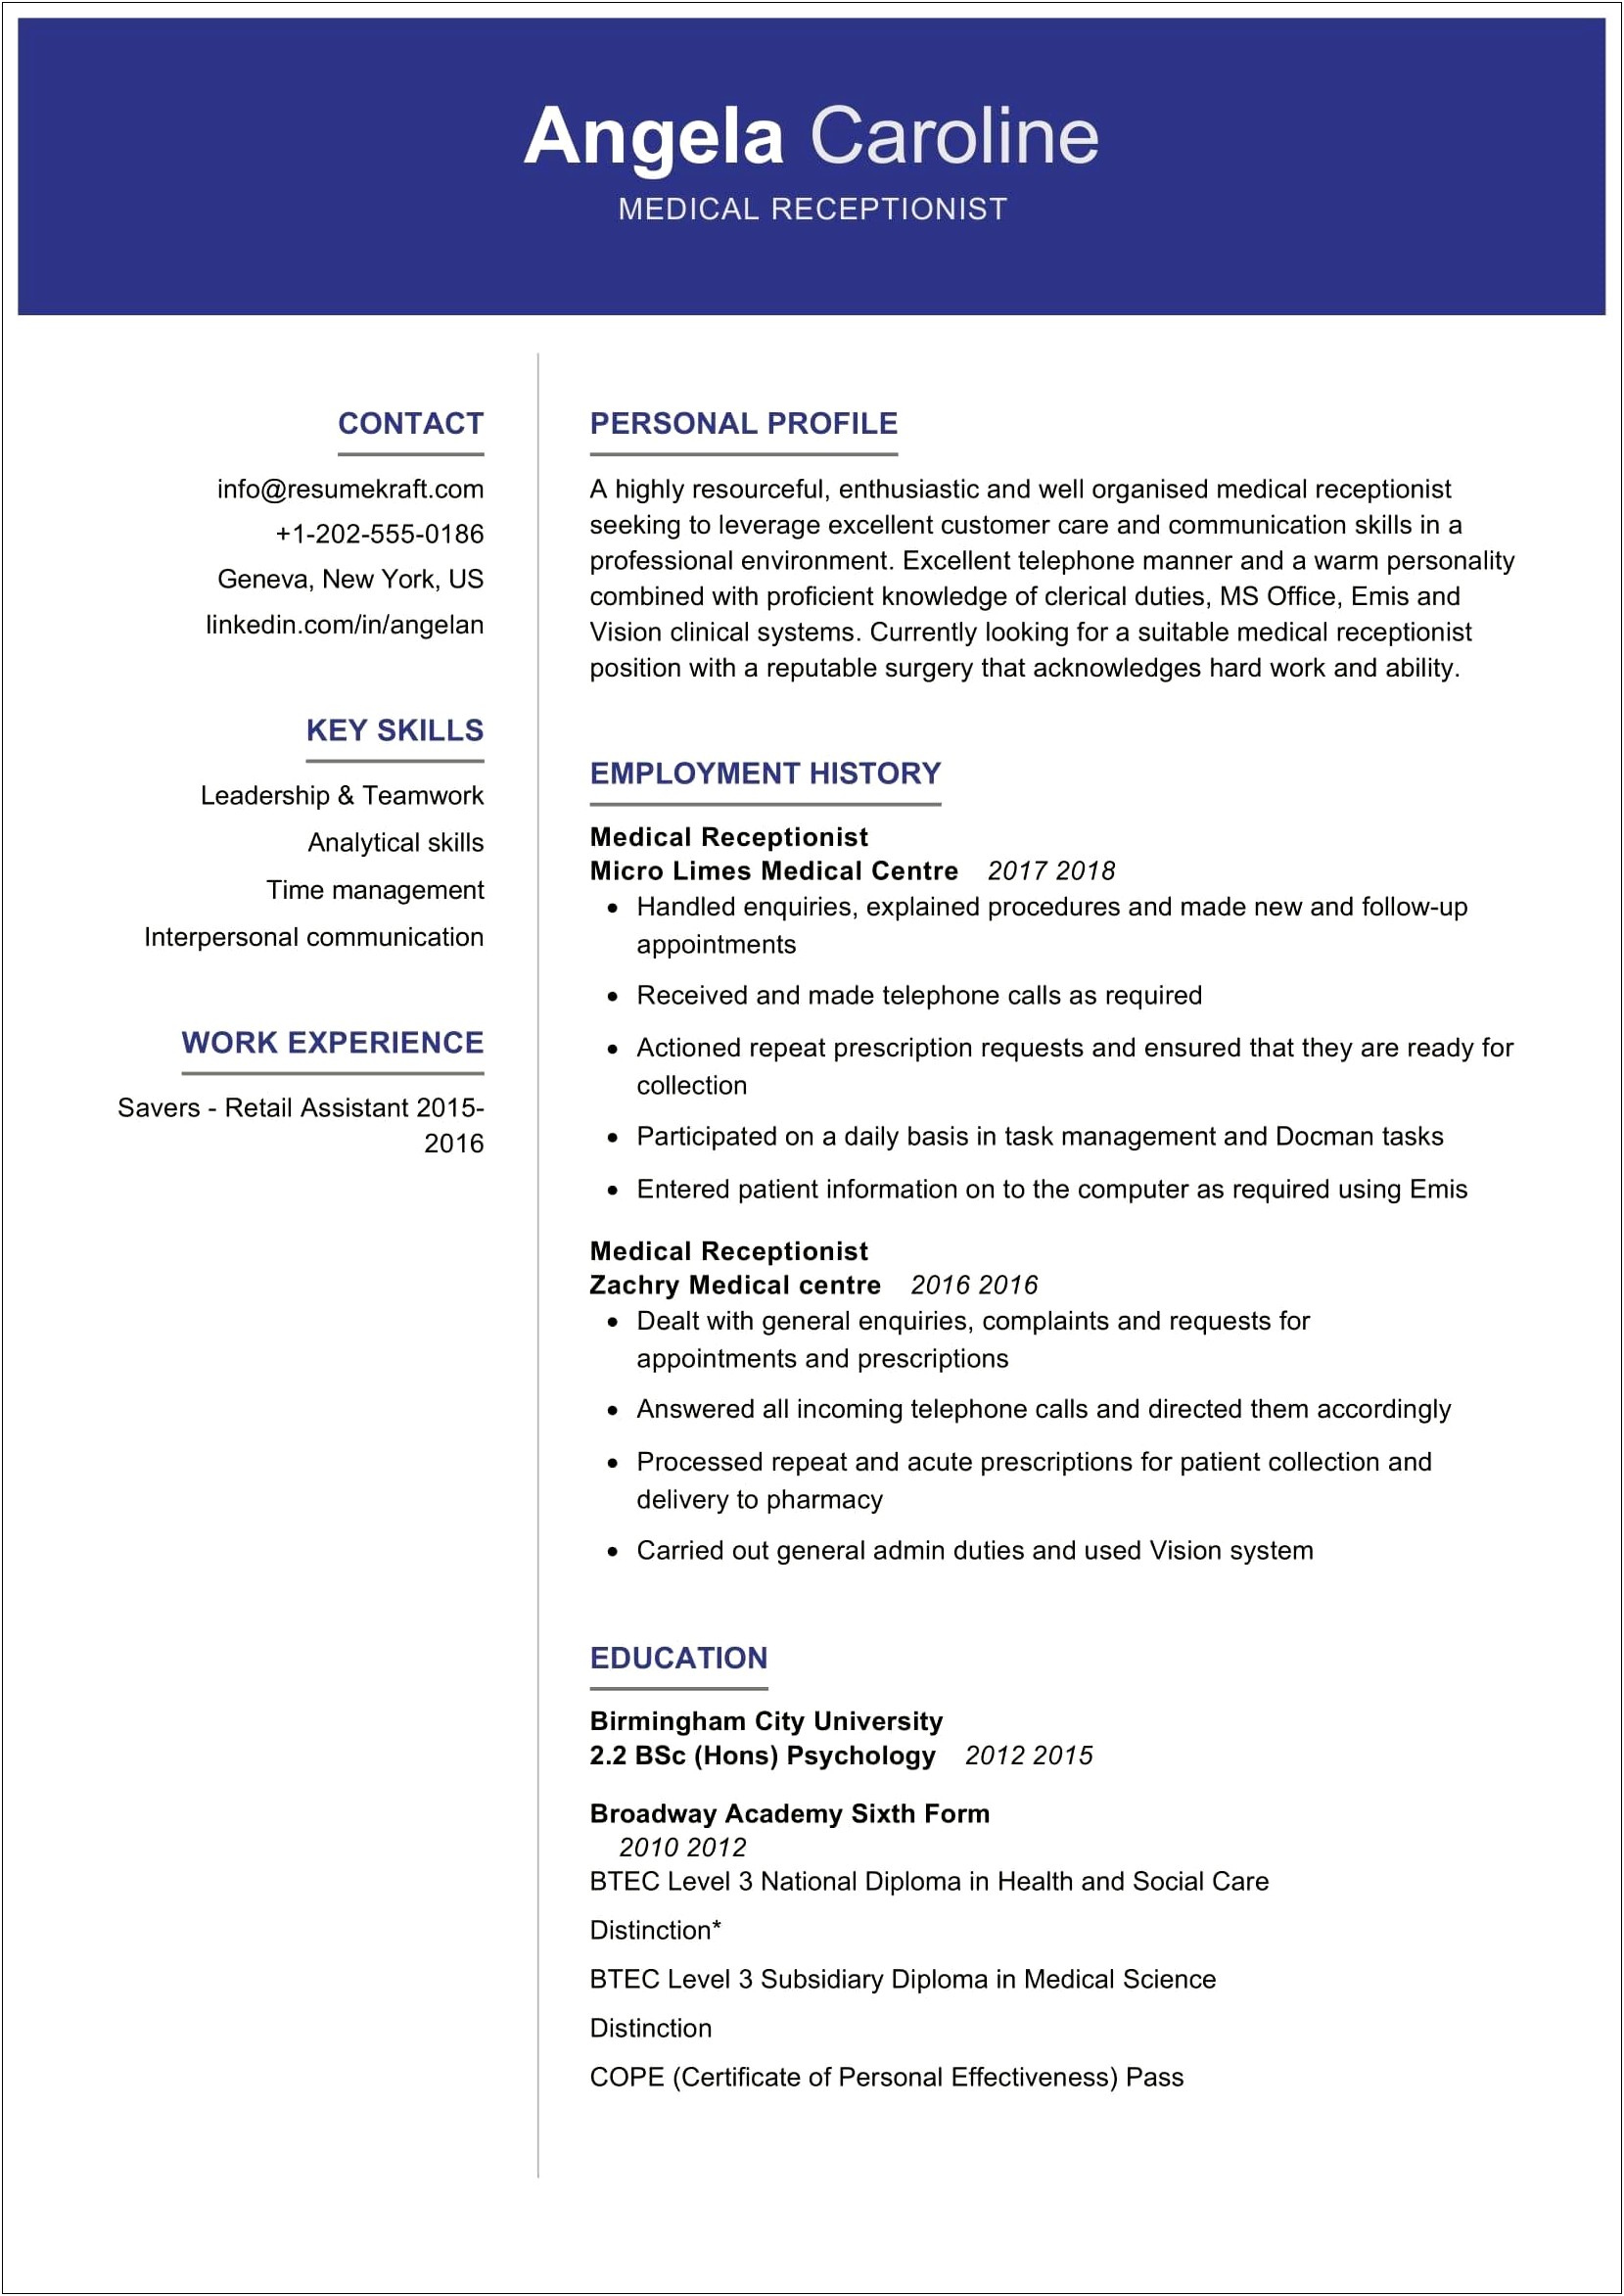 Resume Cover Letter Examples Medical Receptionist